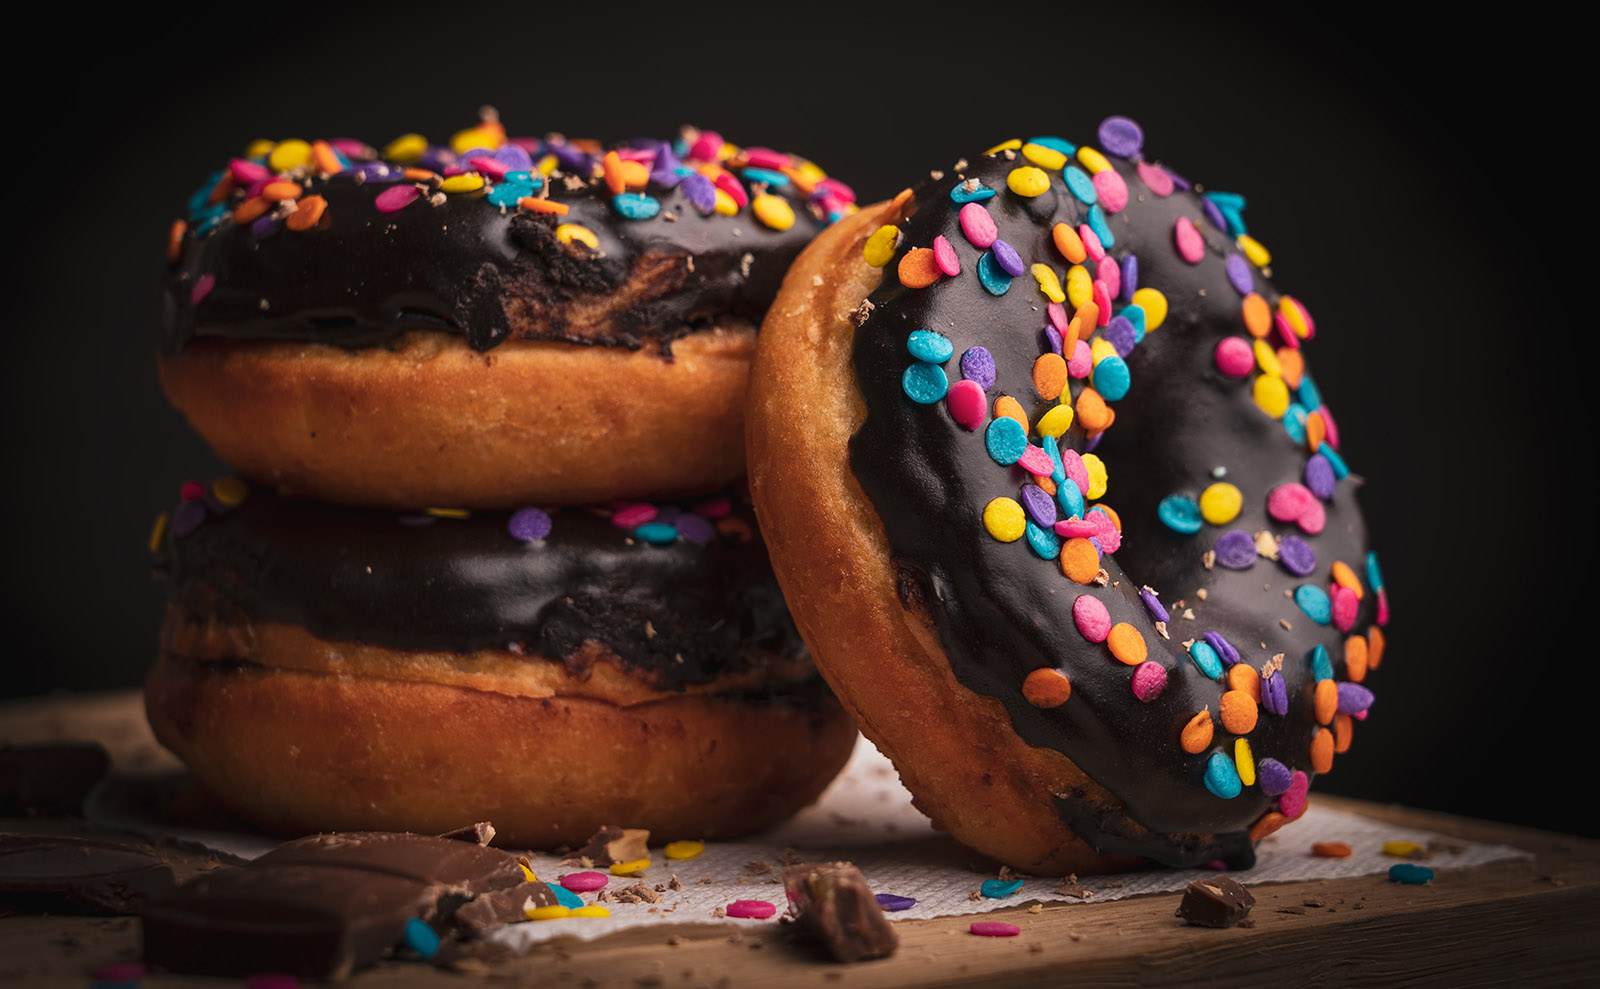 donuts with chocolate frosting on a wooden board